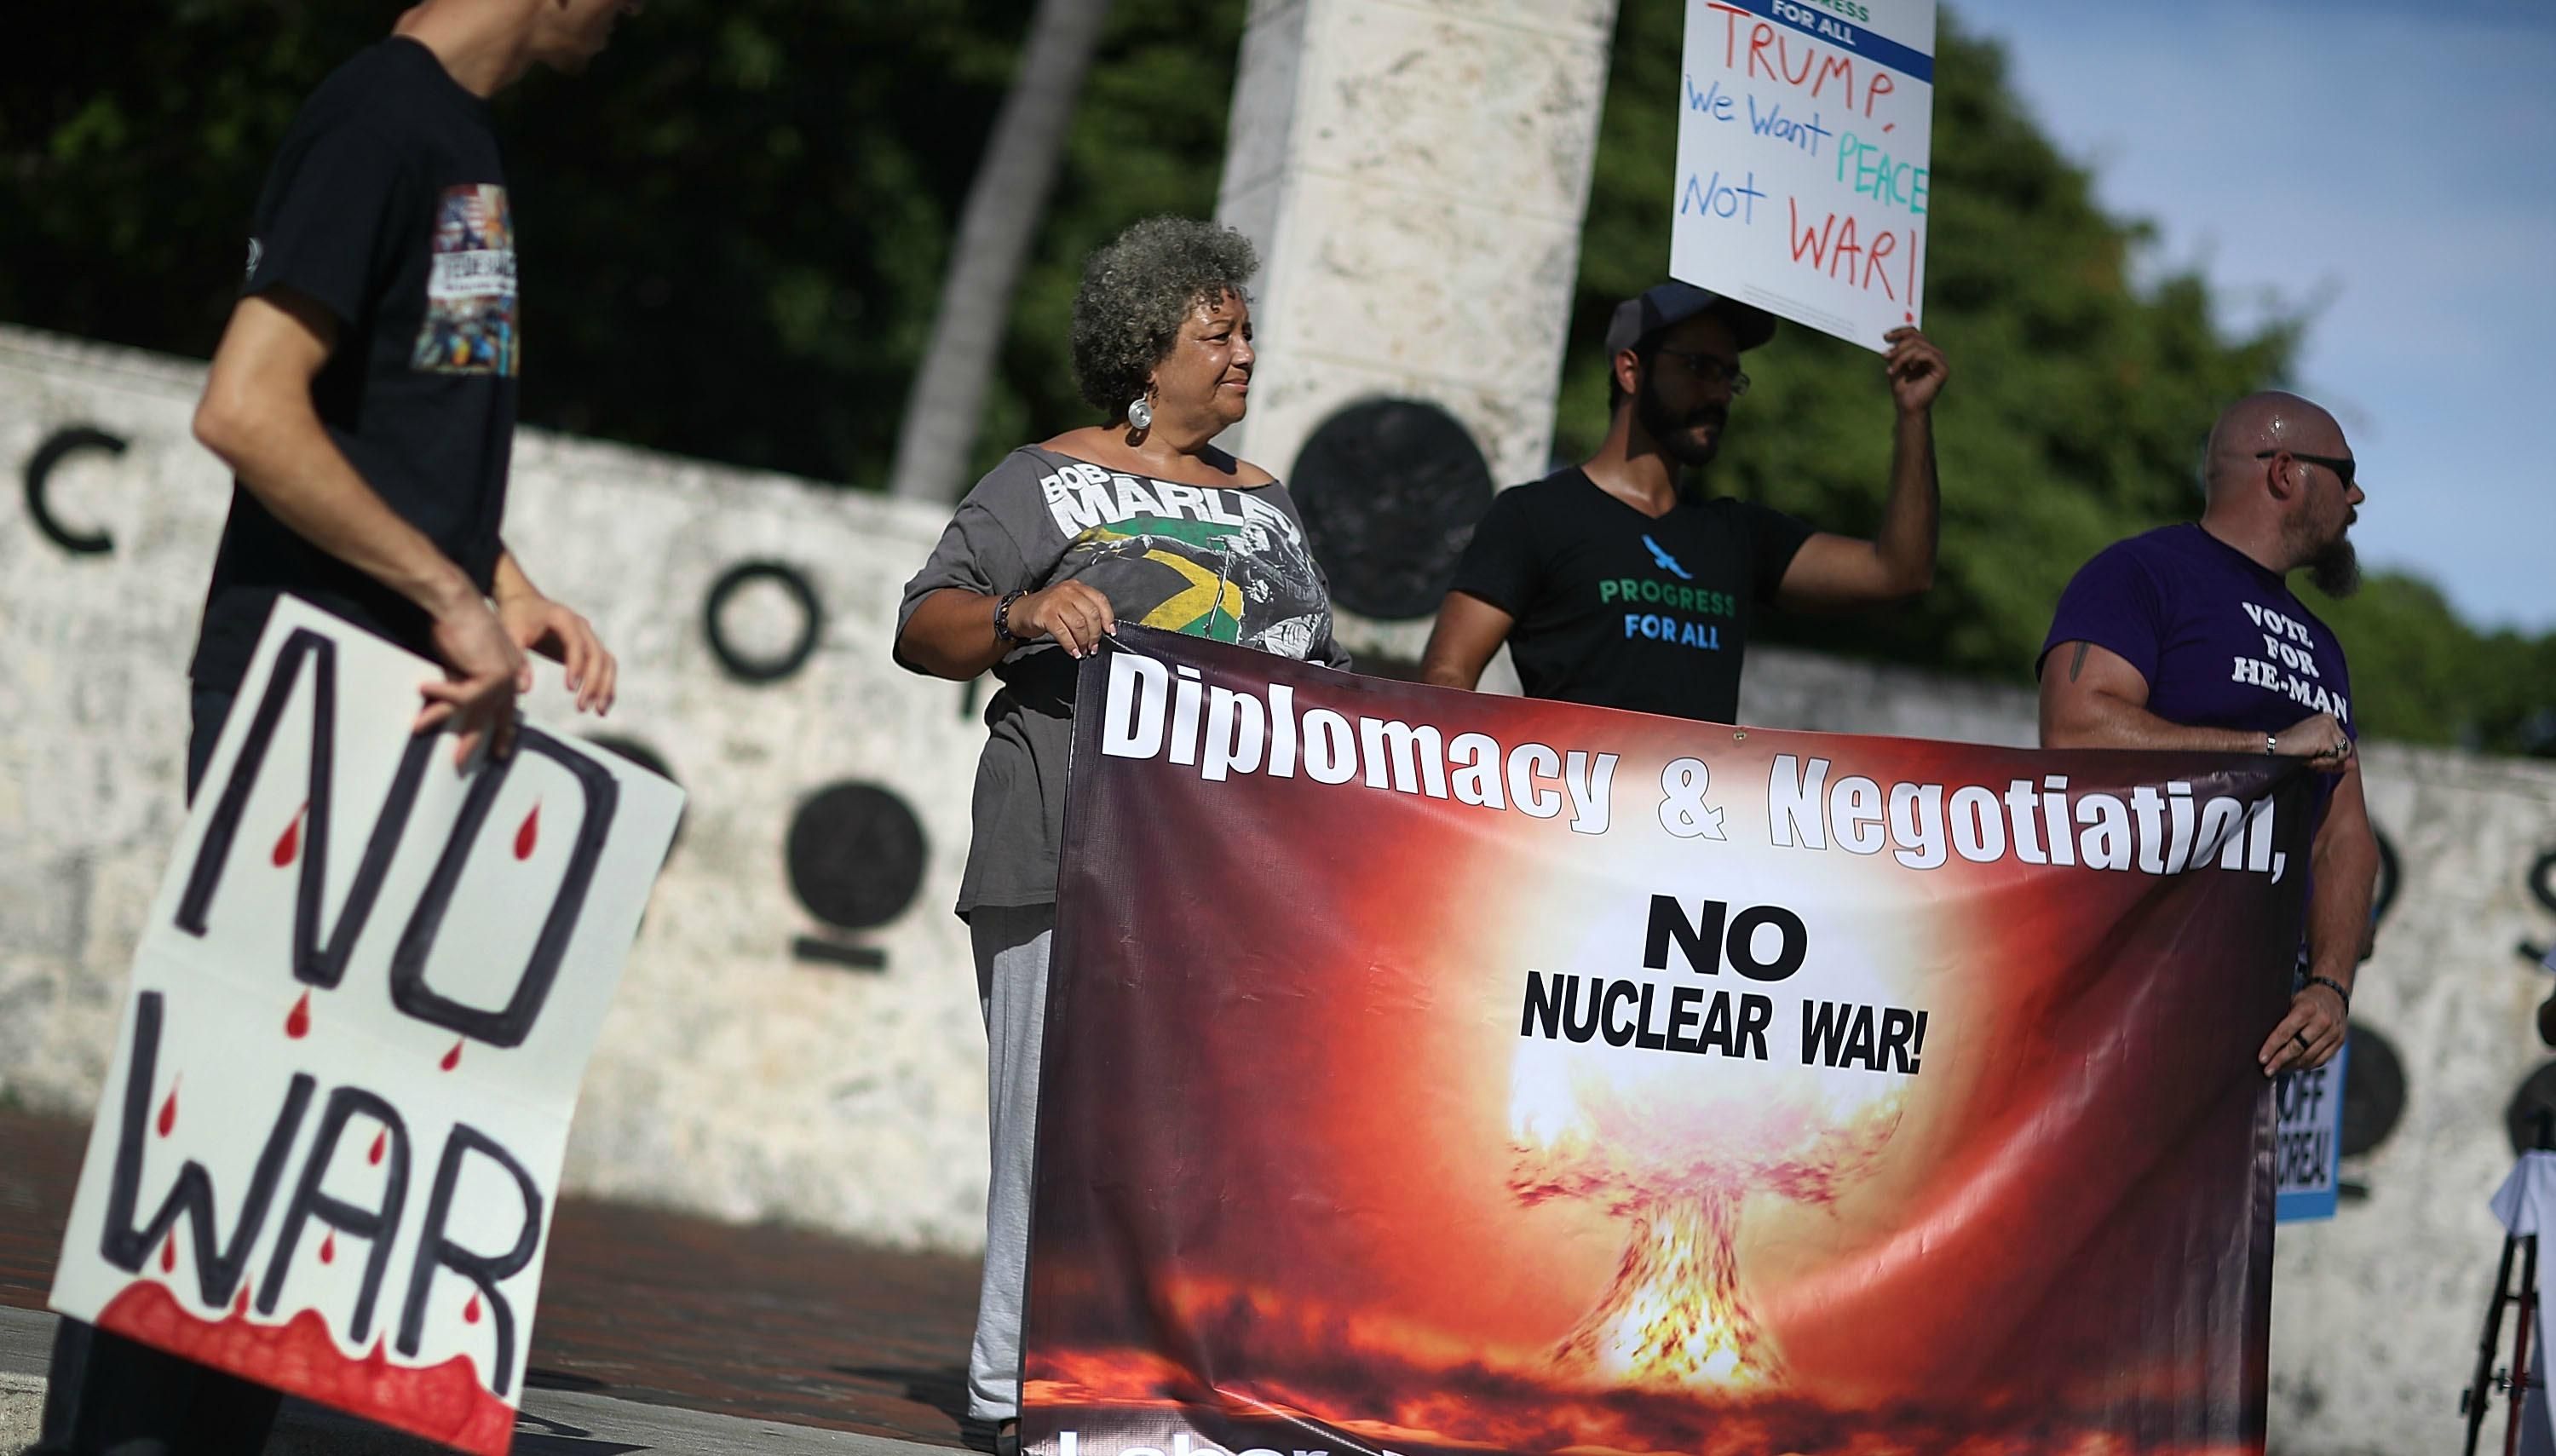 Protesters in Florida gathered in Florida earlier this month to demand a diplomatic approach to tensions with Kim Jong-un's regime.